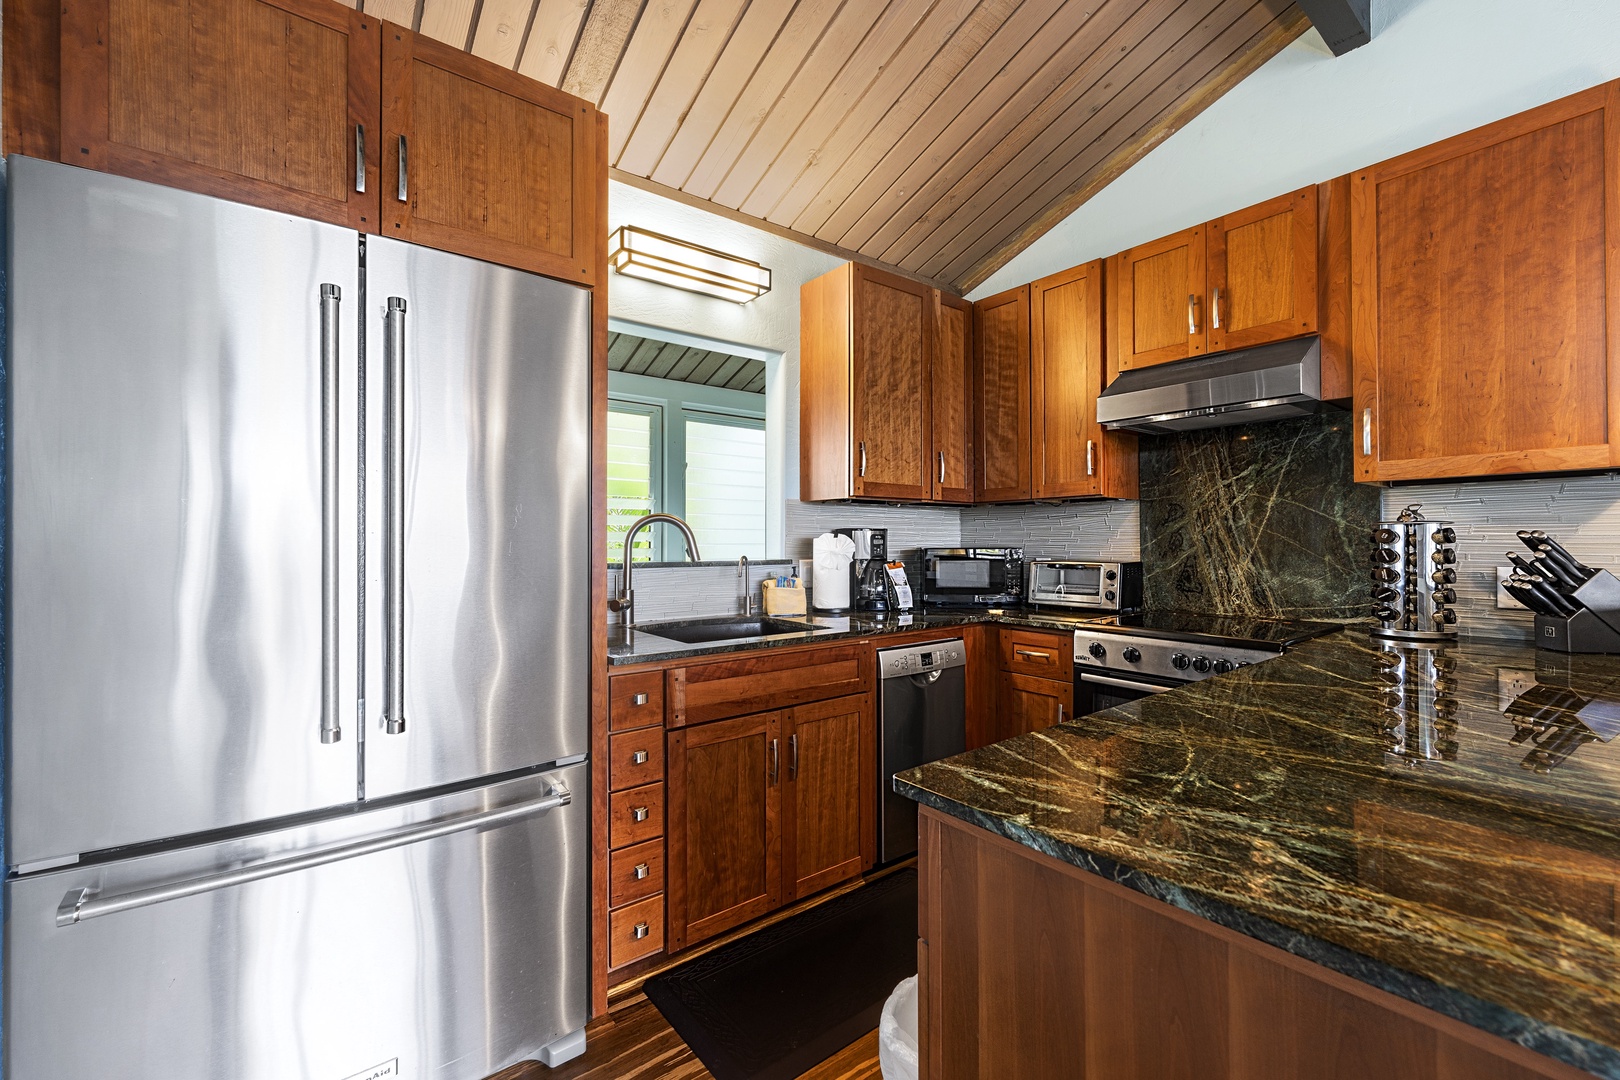 Kailua-Kona Vacation Rentals, Keauhou Resort 116 - Remodeled kitchen with all the utensils you might need